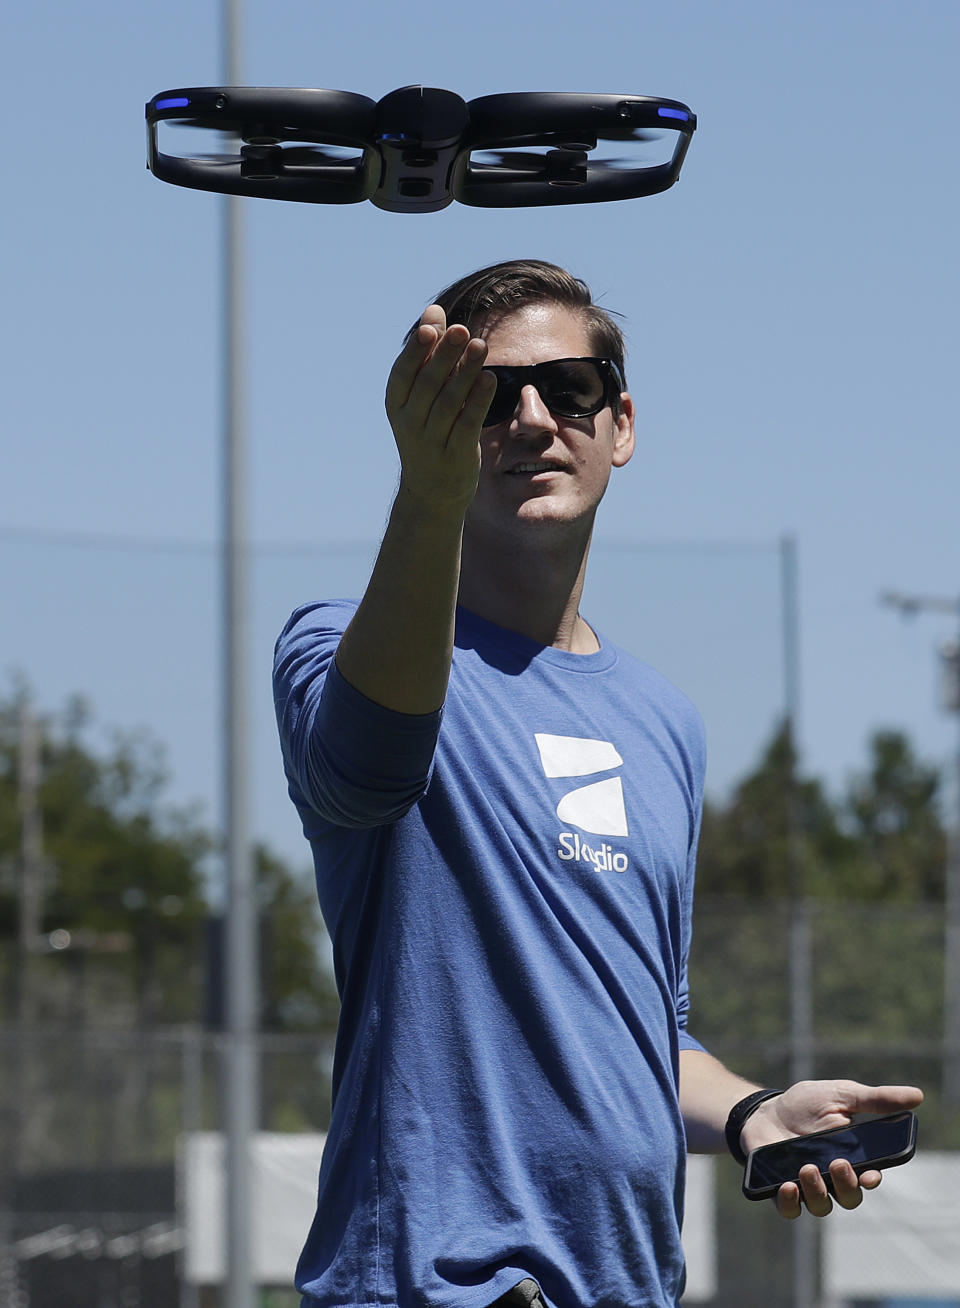 In this June 22, 2018, photo, Skydio head of marketing Patrick Stahl demonstrates using an R1 flying camera drone in Redwood City, Calif. Skateboarders, surfers and YouTube stars used to be the target customers for California drone startup Skydio, which builds sophisticated self-flying machines that can follow people around and capture their best moves on video. Now it's police officers and soldiers getting equipped with the pricey drones. U.S. political and security concerns about the world's dominant consumer drone-maker, China-based DJI, have opened the door for Skydio and other companies to pitch their drones for government and business customers. (AP Photo/Jeff Chiu)